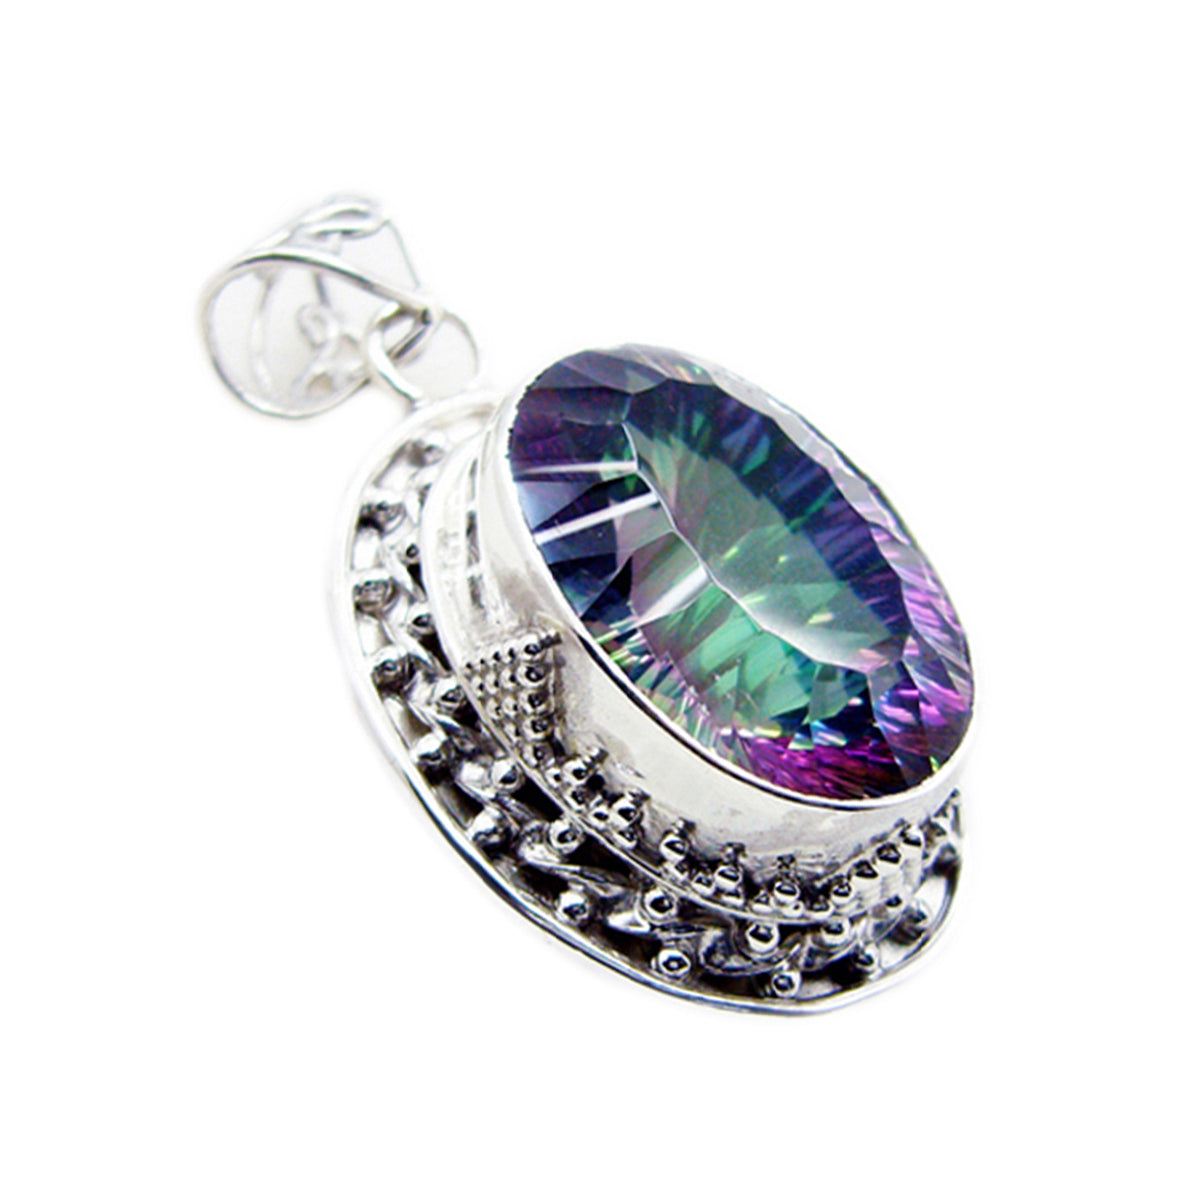 Riyo Attractive Gems Oval Faceted Multi Color Mystic Quartz Silver Pendant Gift For Engagement